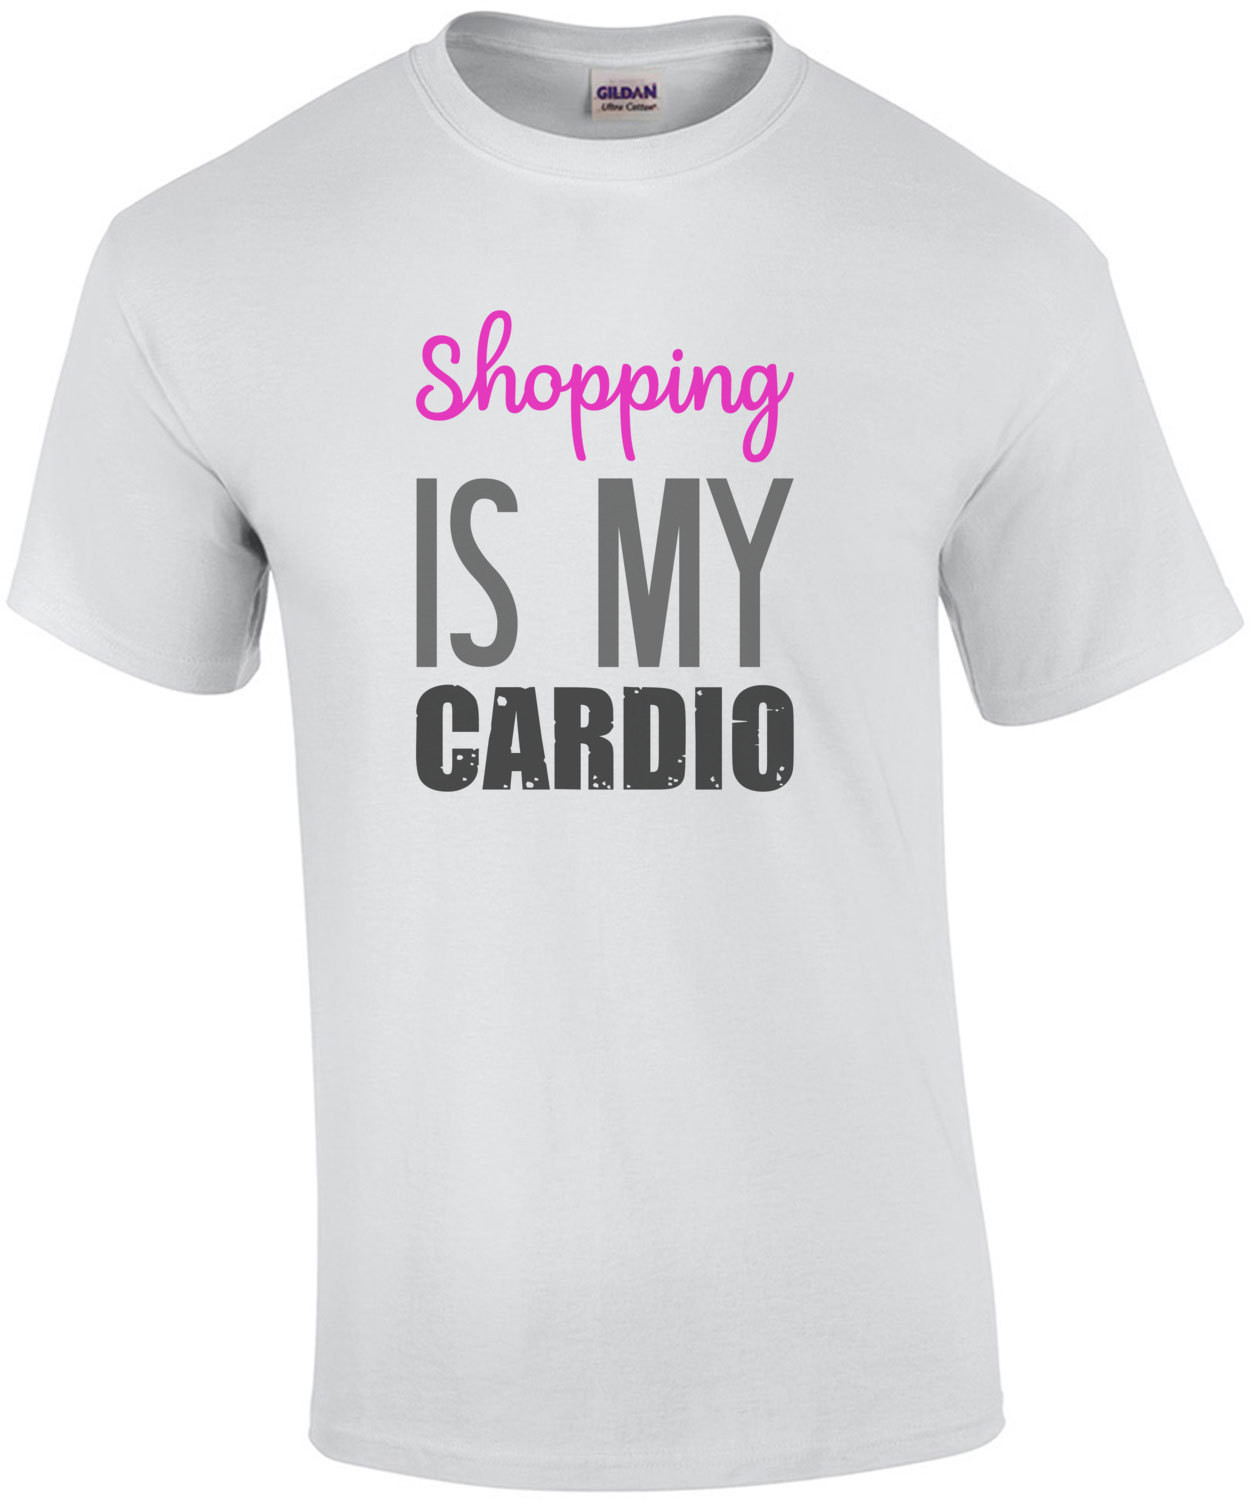 Shopping is my cardio - funny ladies t-shirt